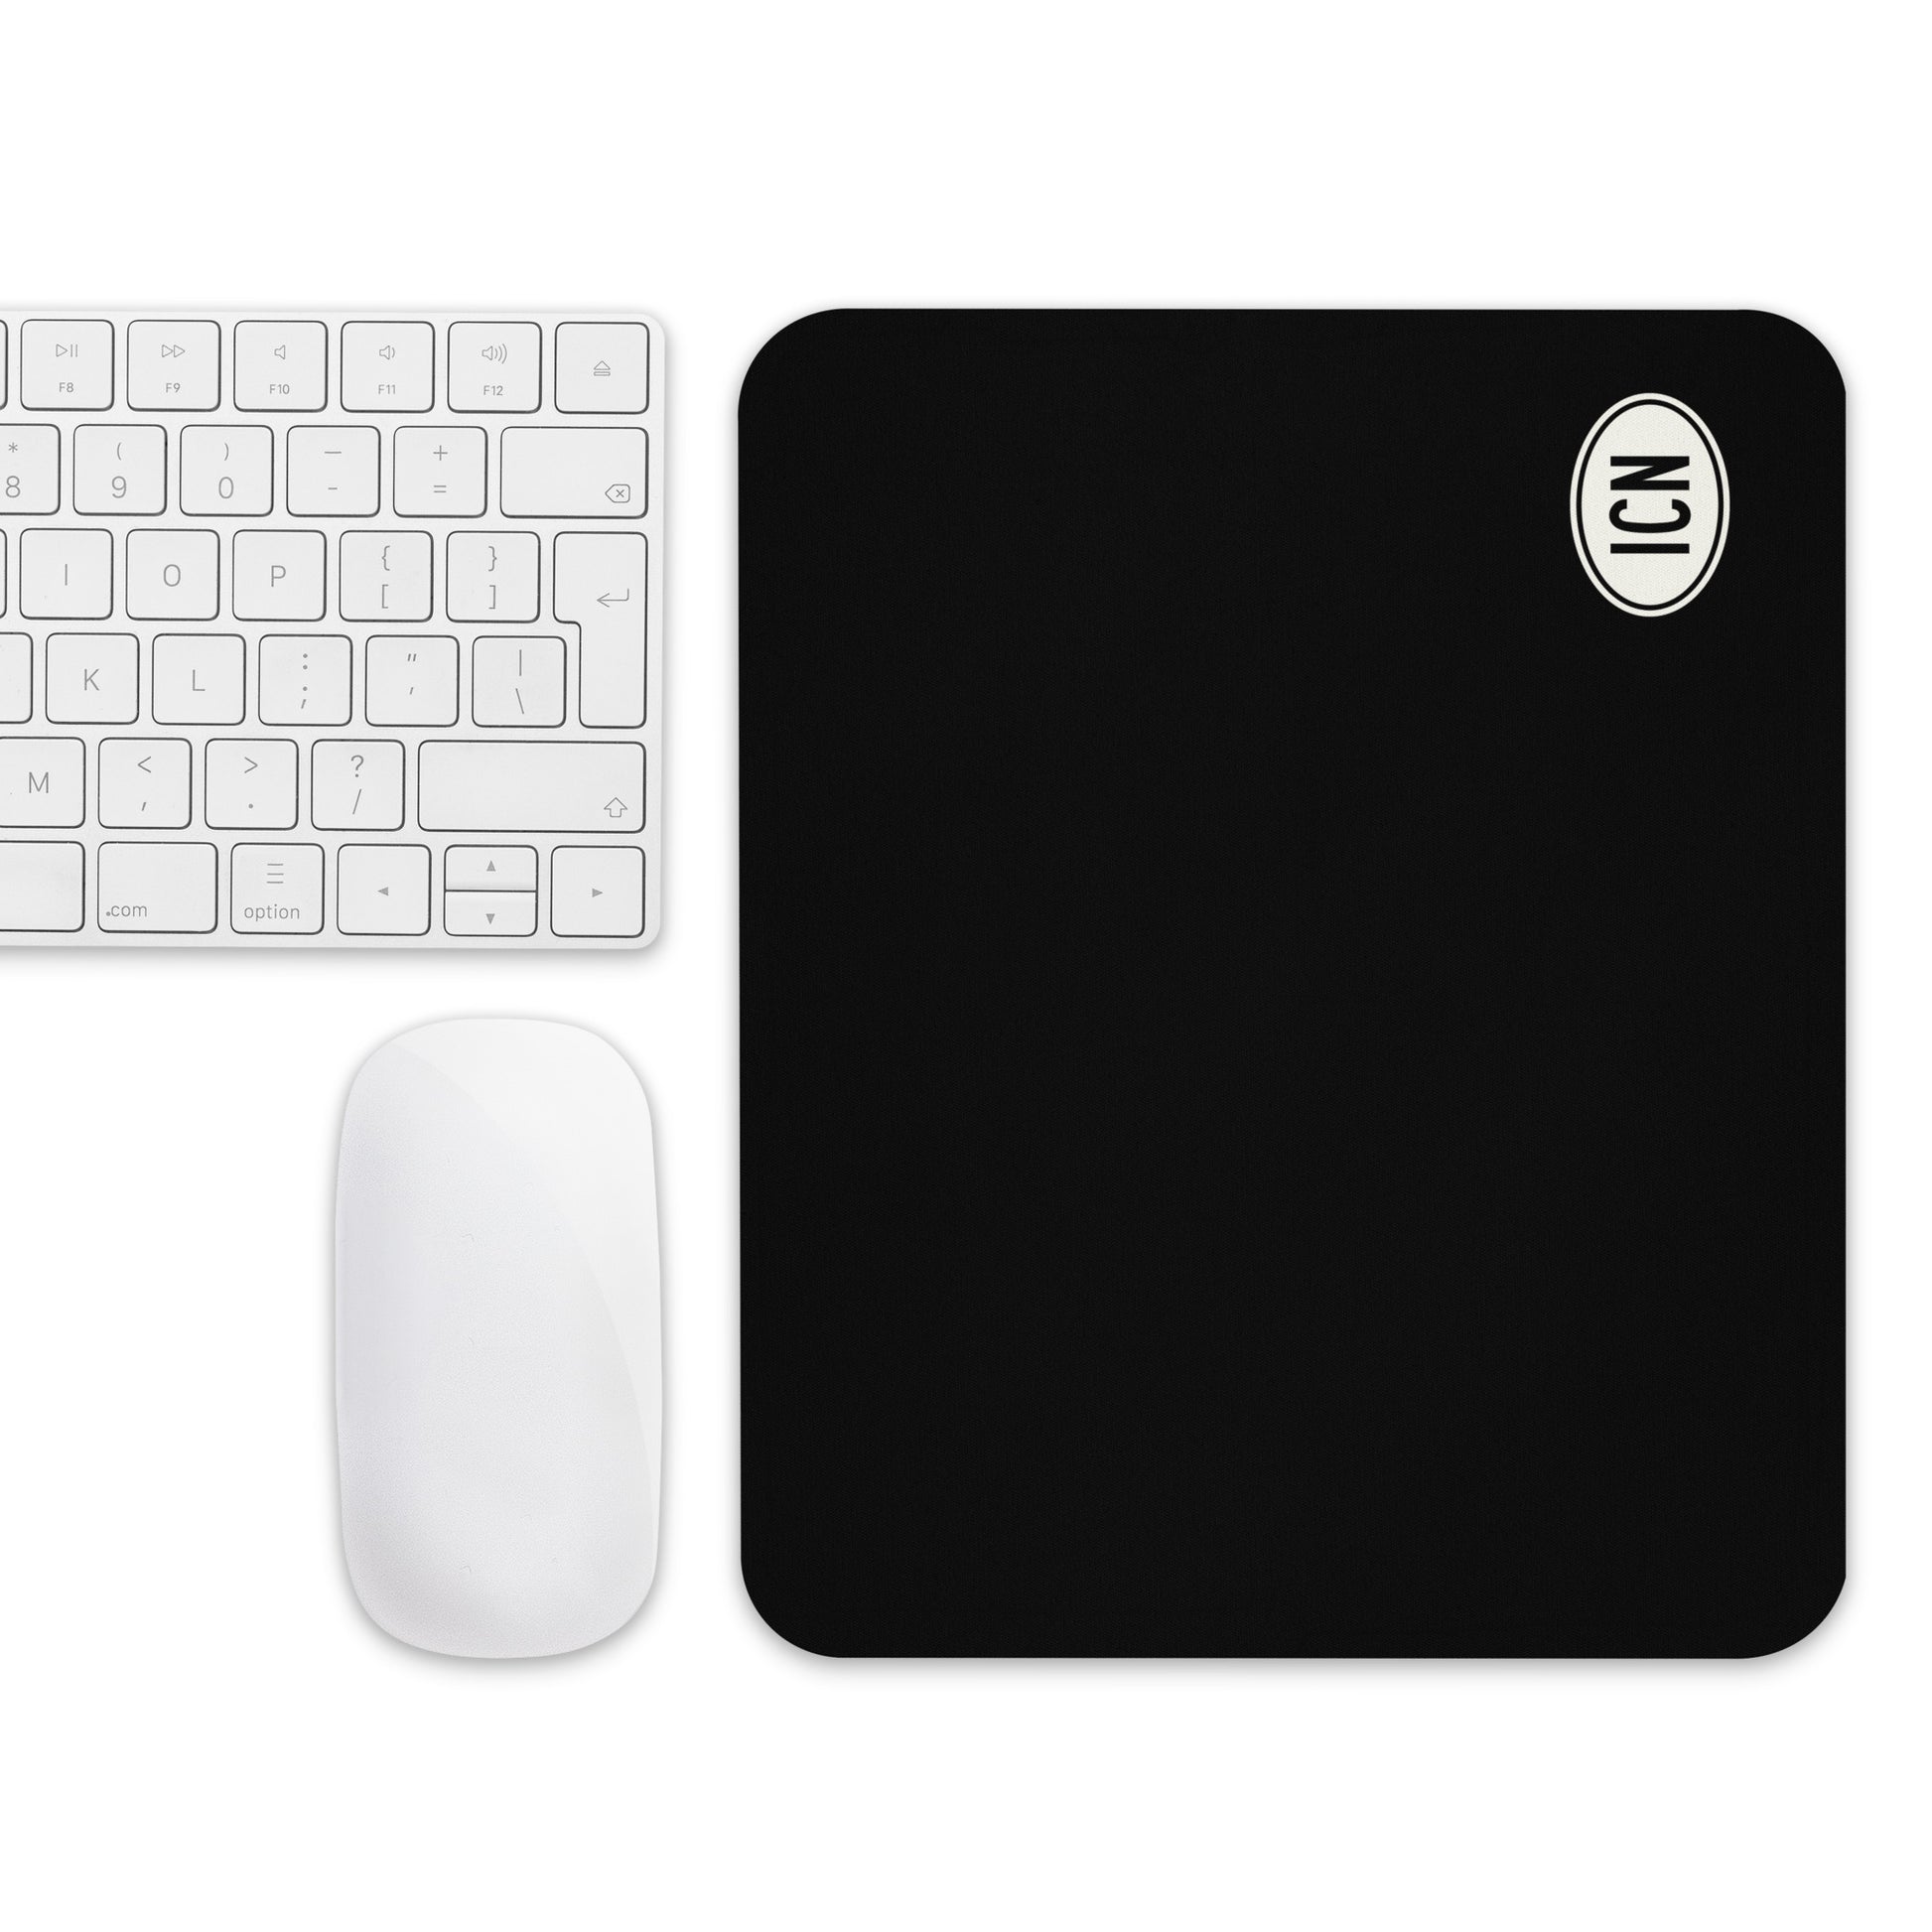 Unique Travel Gift Mouse Pad - White Oval • ICN Seoul • YHM Designs - Image 04